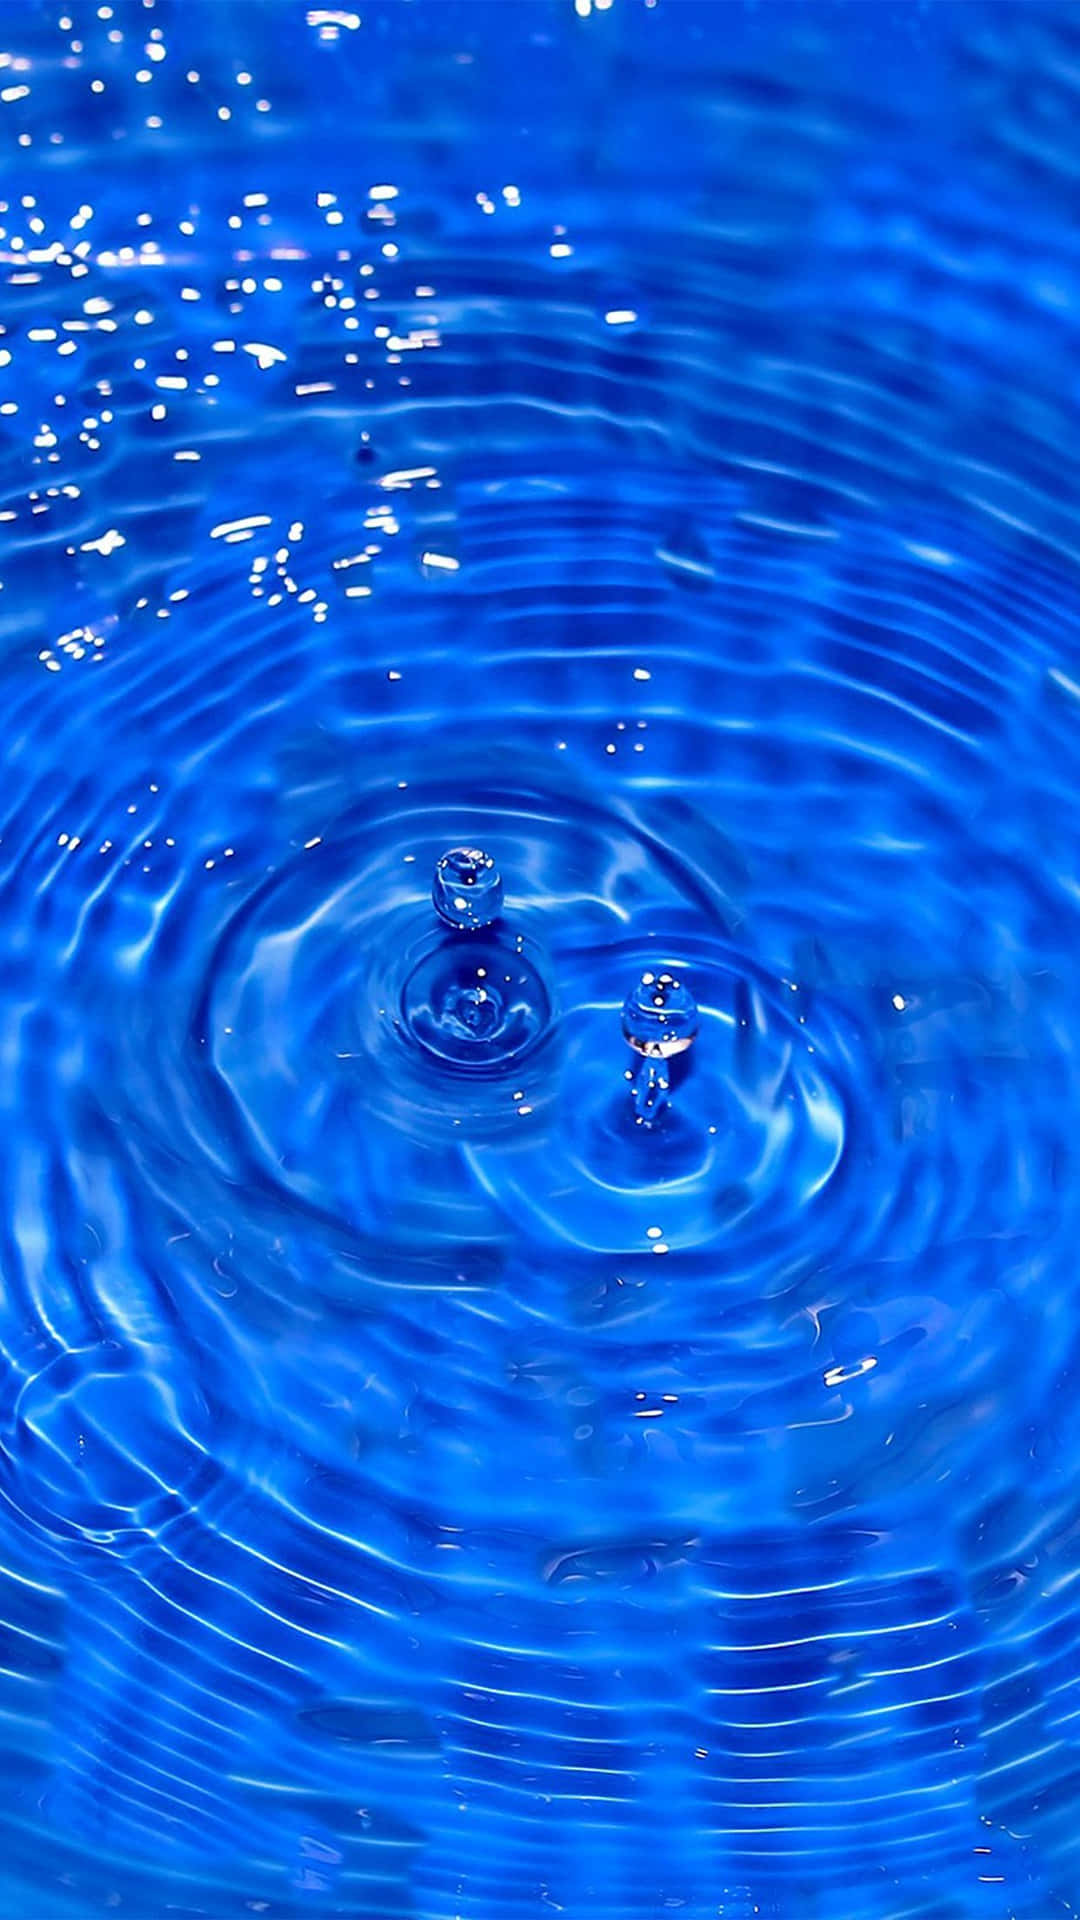 Get the Power of Water with your Iphone Wallpaper